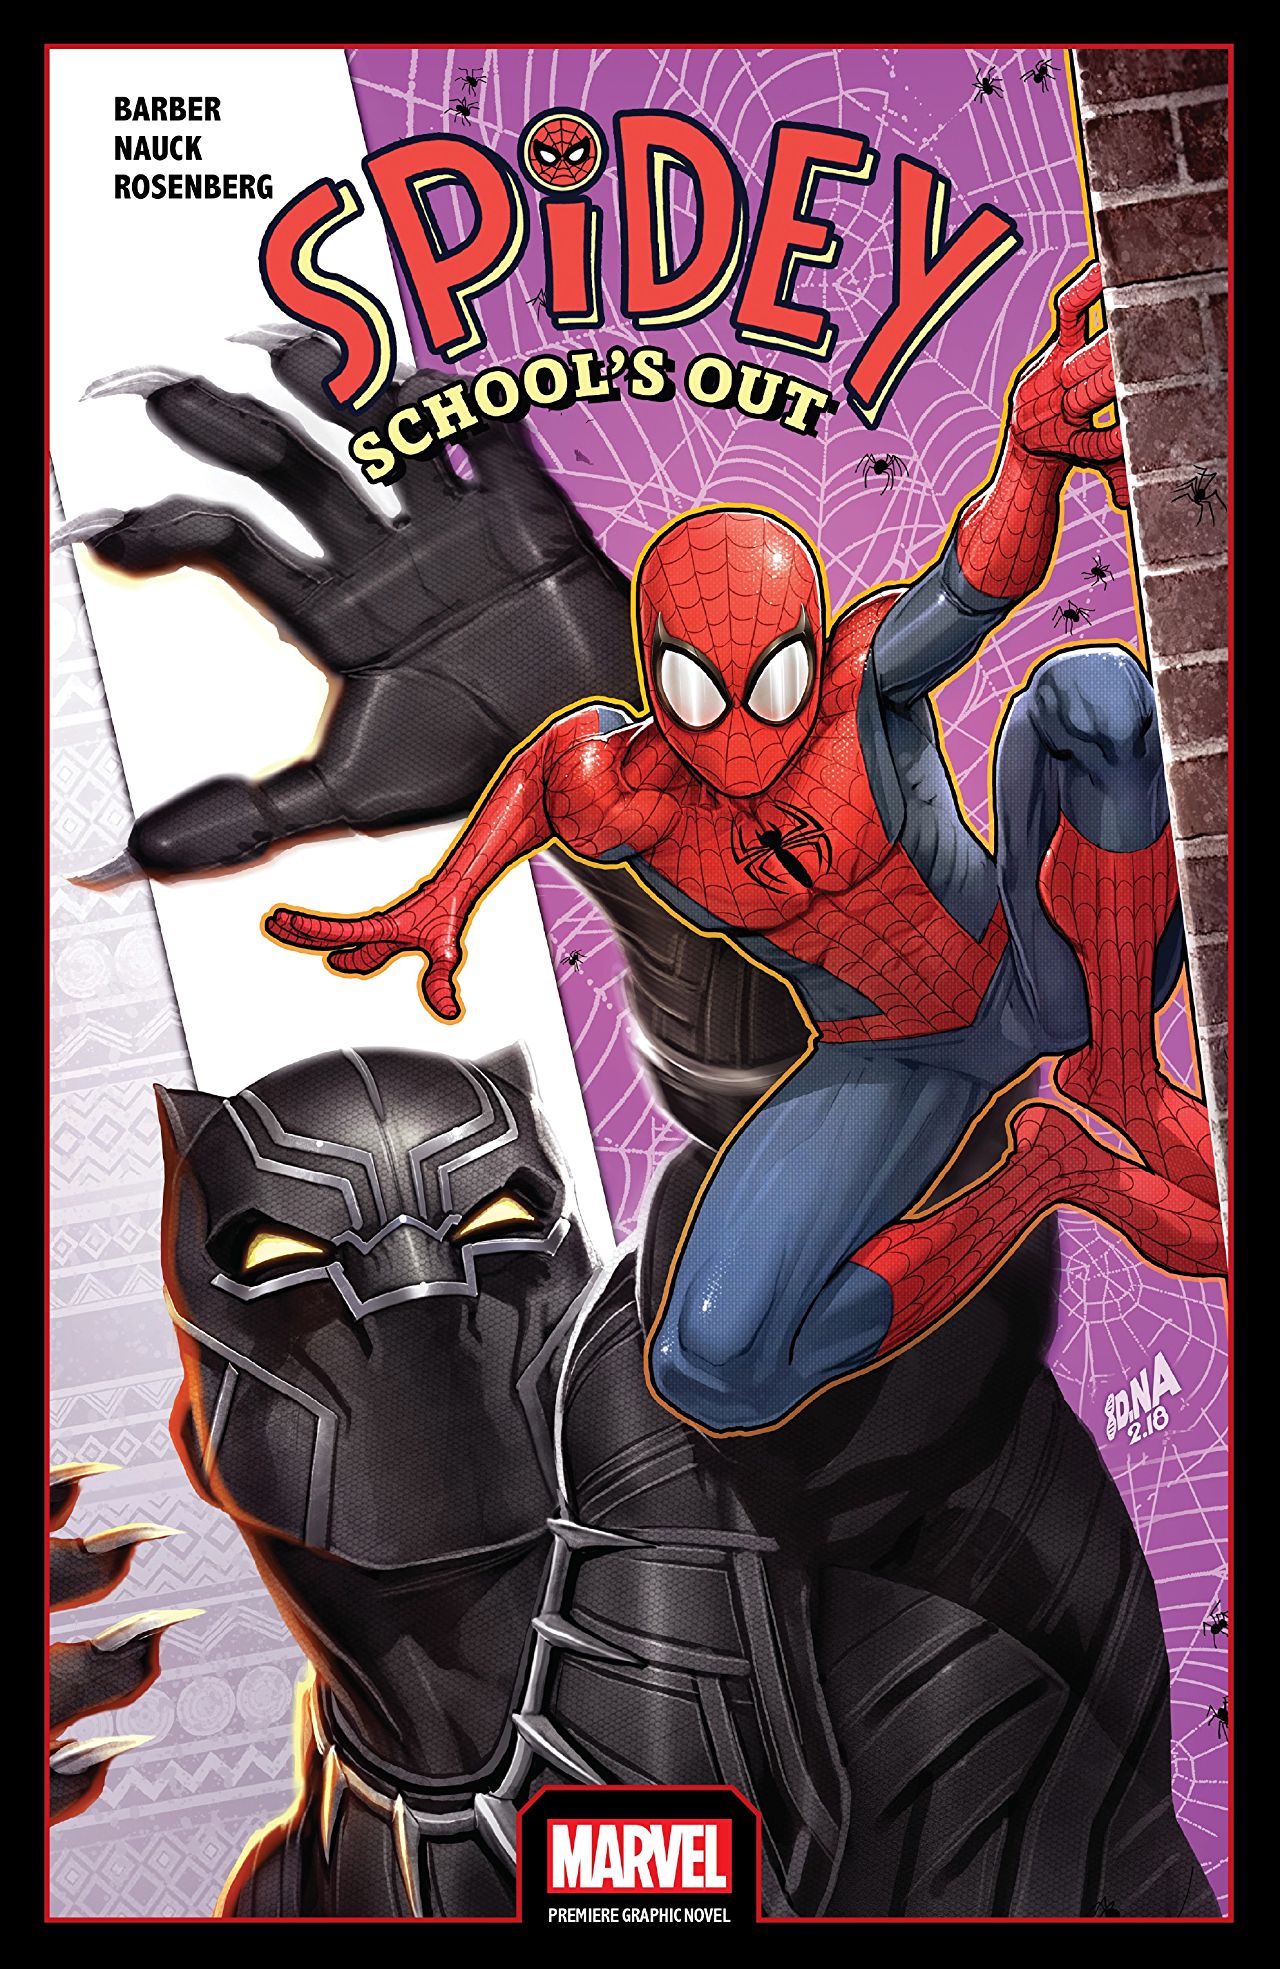 'Spidey: School's Out' Gets Spider-Man and Peter Parker Right